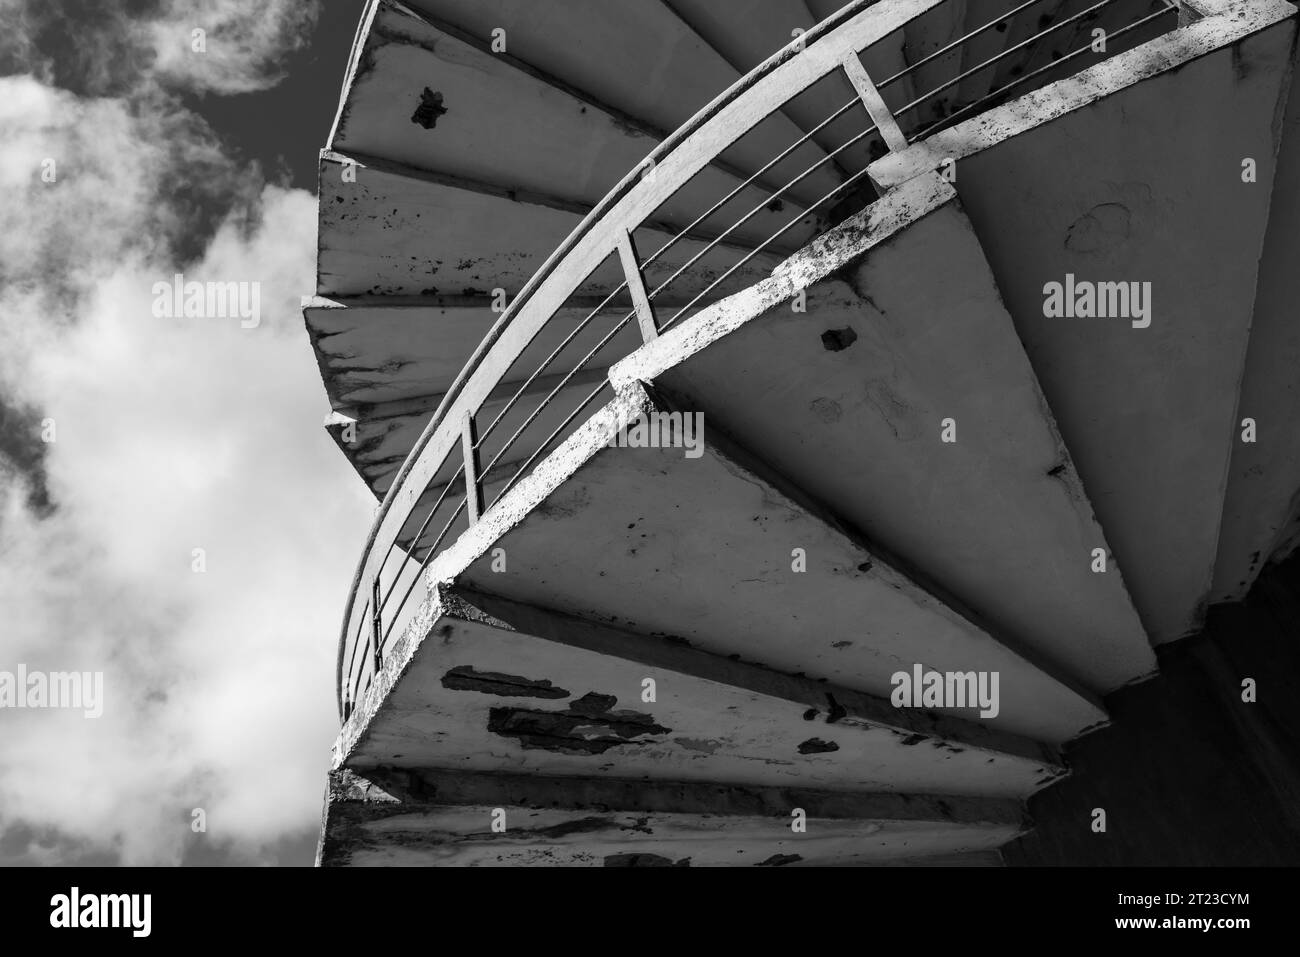 Grungy spiral ladder is under cloudy sky, abstract architectural photo. Black and white photo Stock Photo